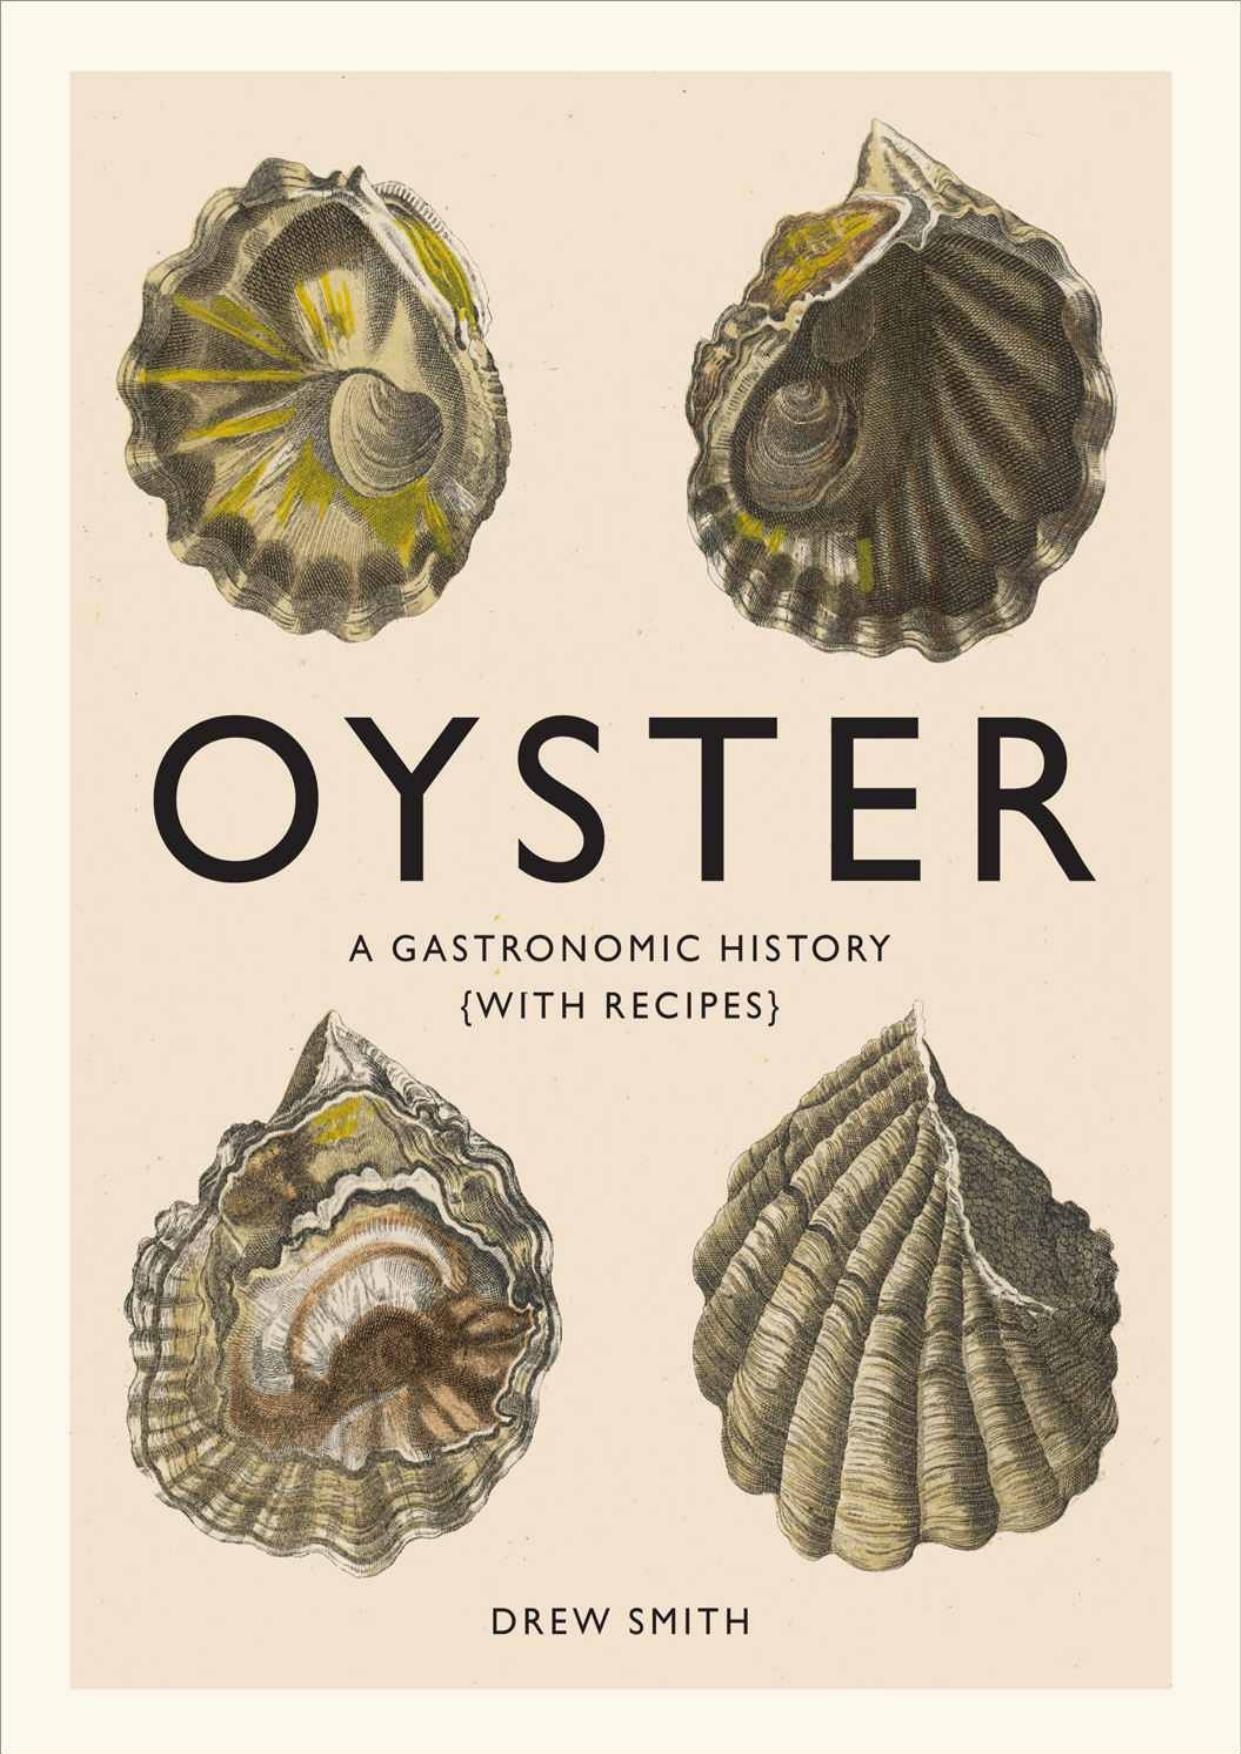 Oyster: A Gastronomic History (with Recipes) by Drew Smith